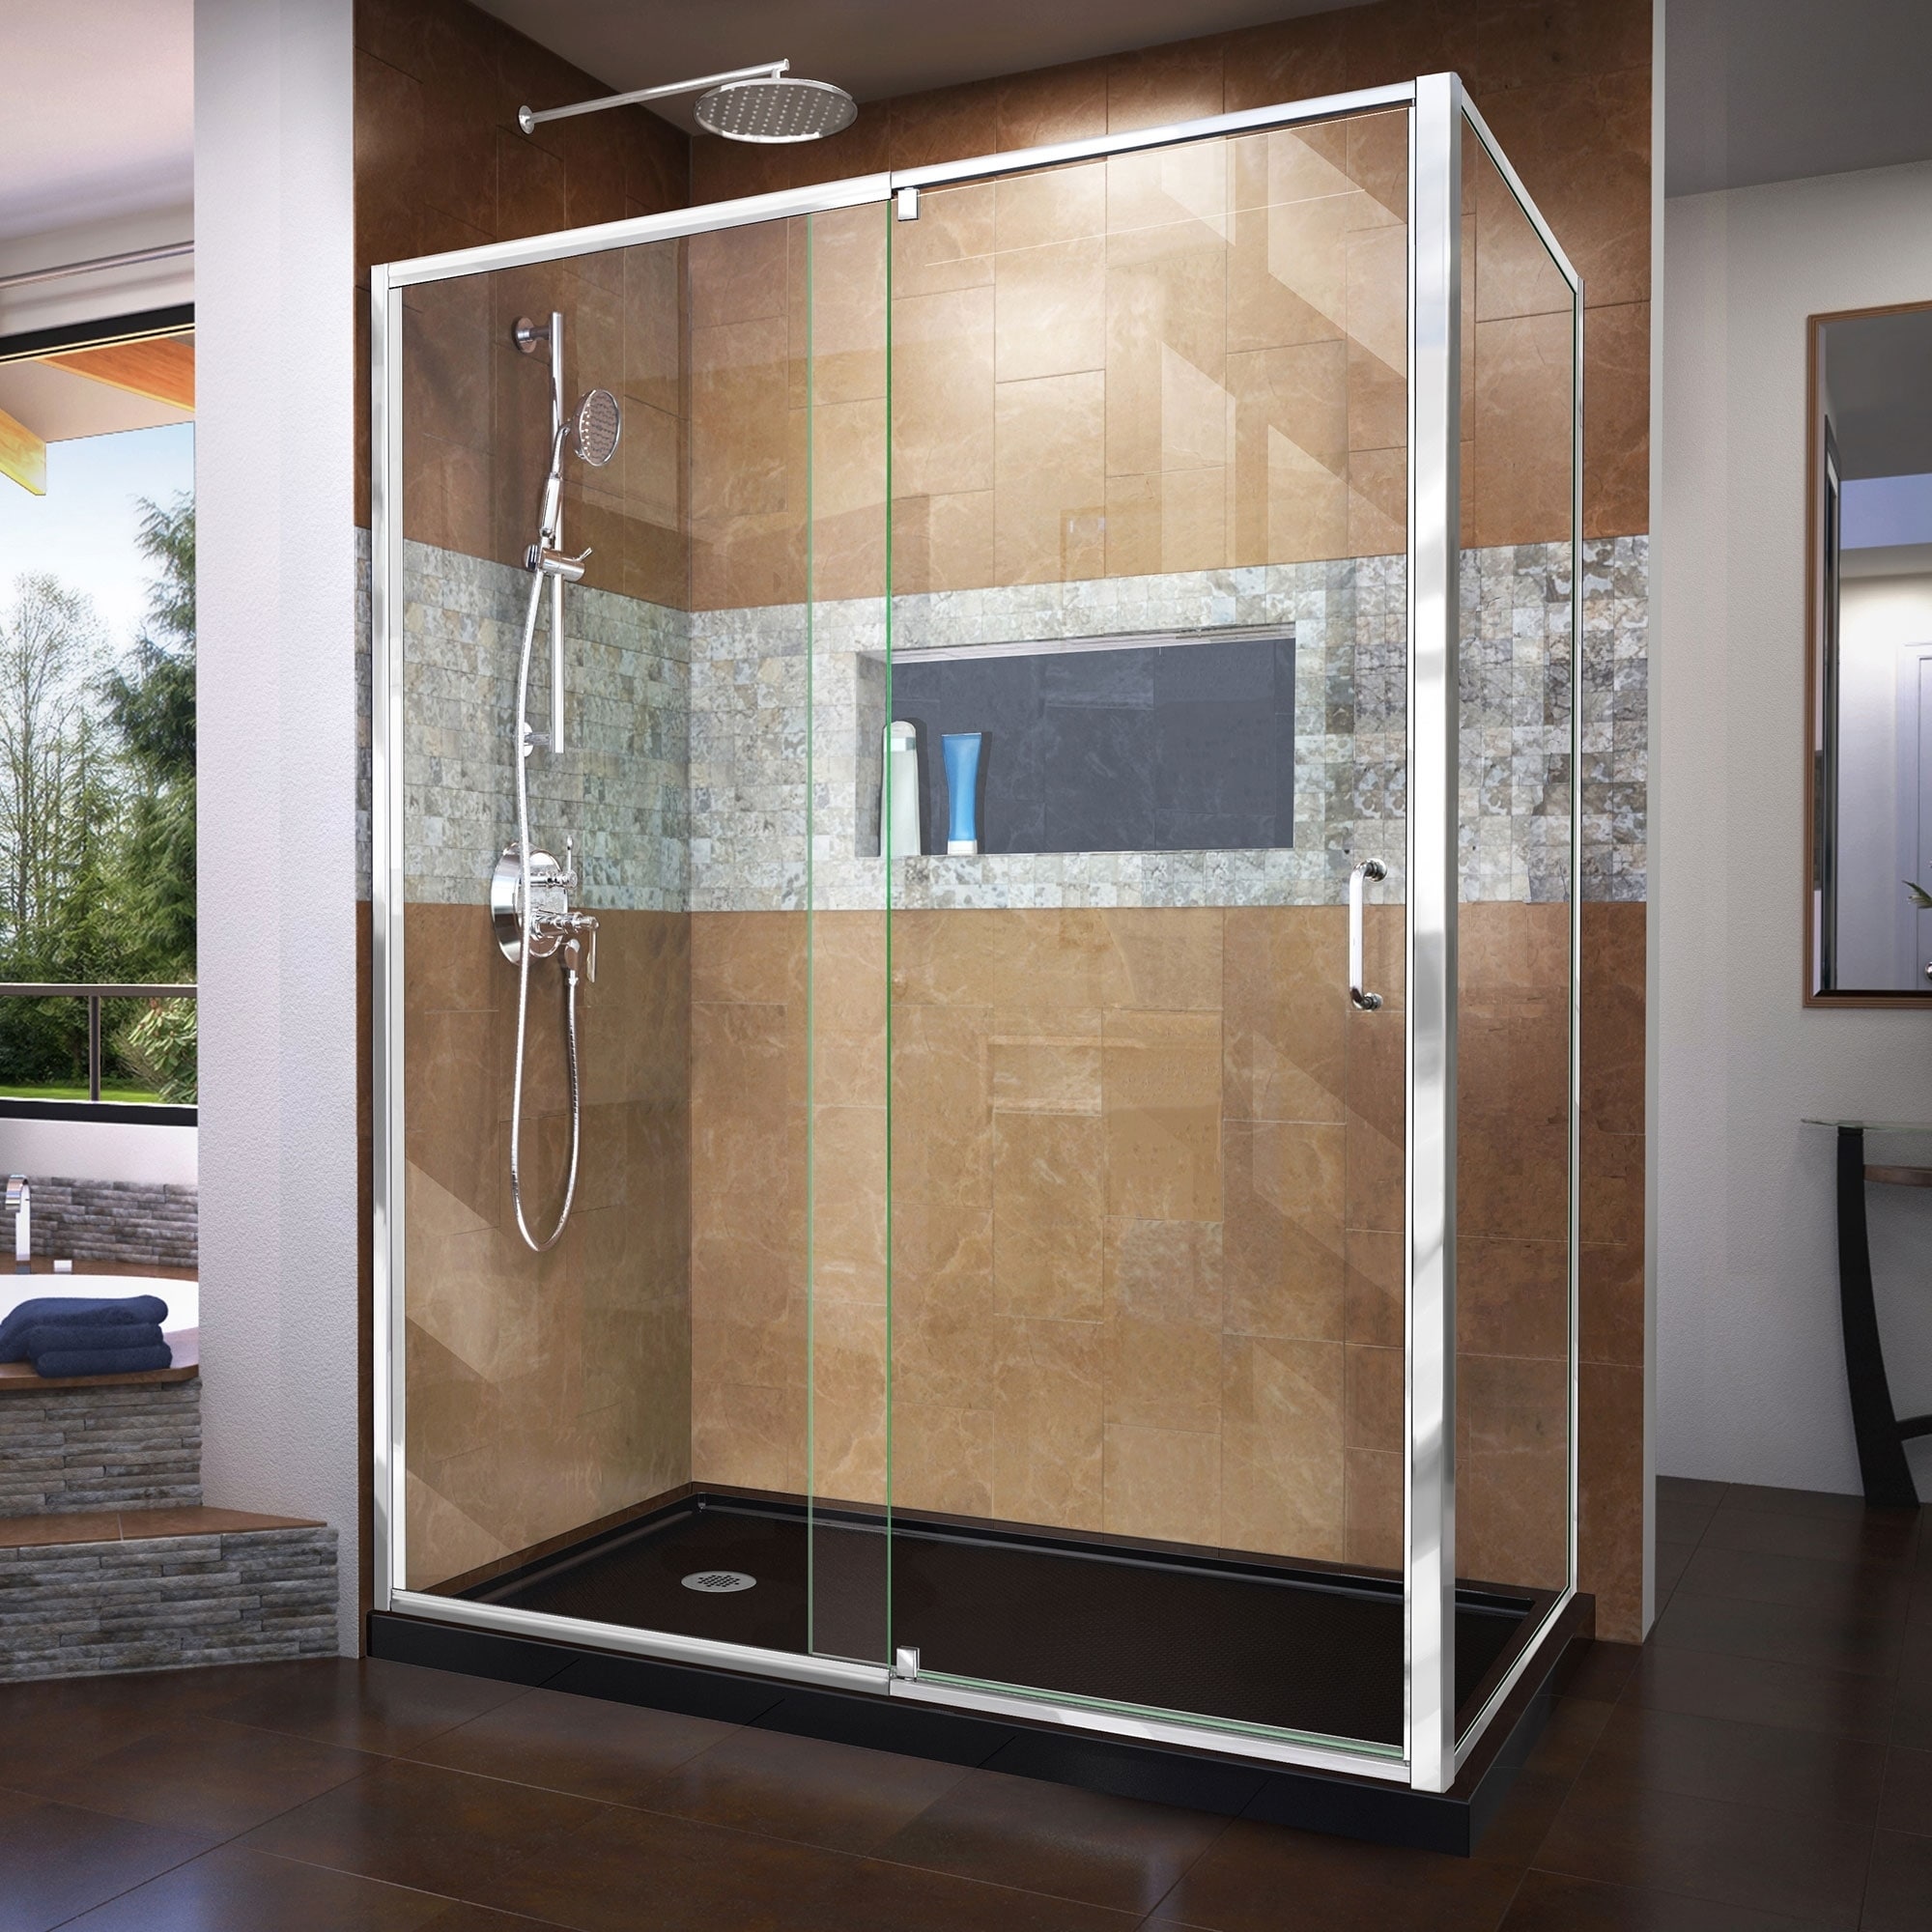 https://ak1.ostkcdn.com/images/products/18689391/DreamLine-Flex-36-in.-D-x-60-in.-W-x-74-3-4-in.-H-Pivot-Shower-Enclosure-and-Shower-Base-Kit-36-x-60-23949358-d815-427a-9bea-d1f26f42954c.jpg